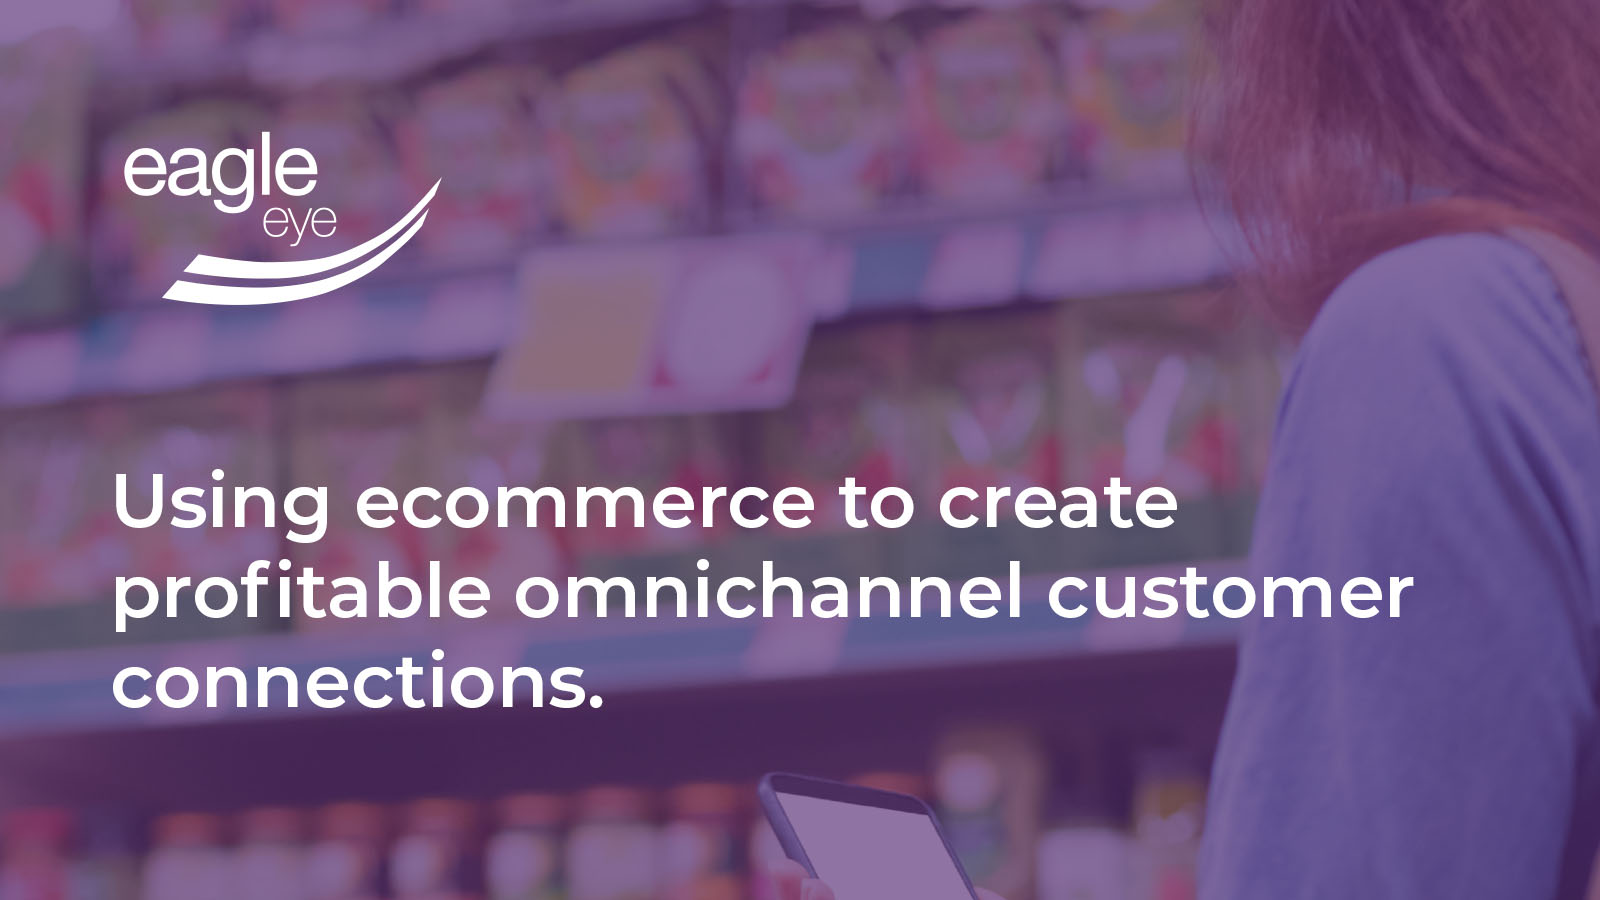 Using eCommerce to create profitable omnichannel customer connections